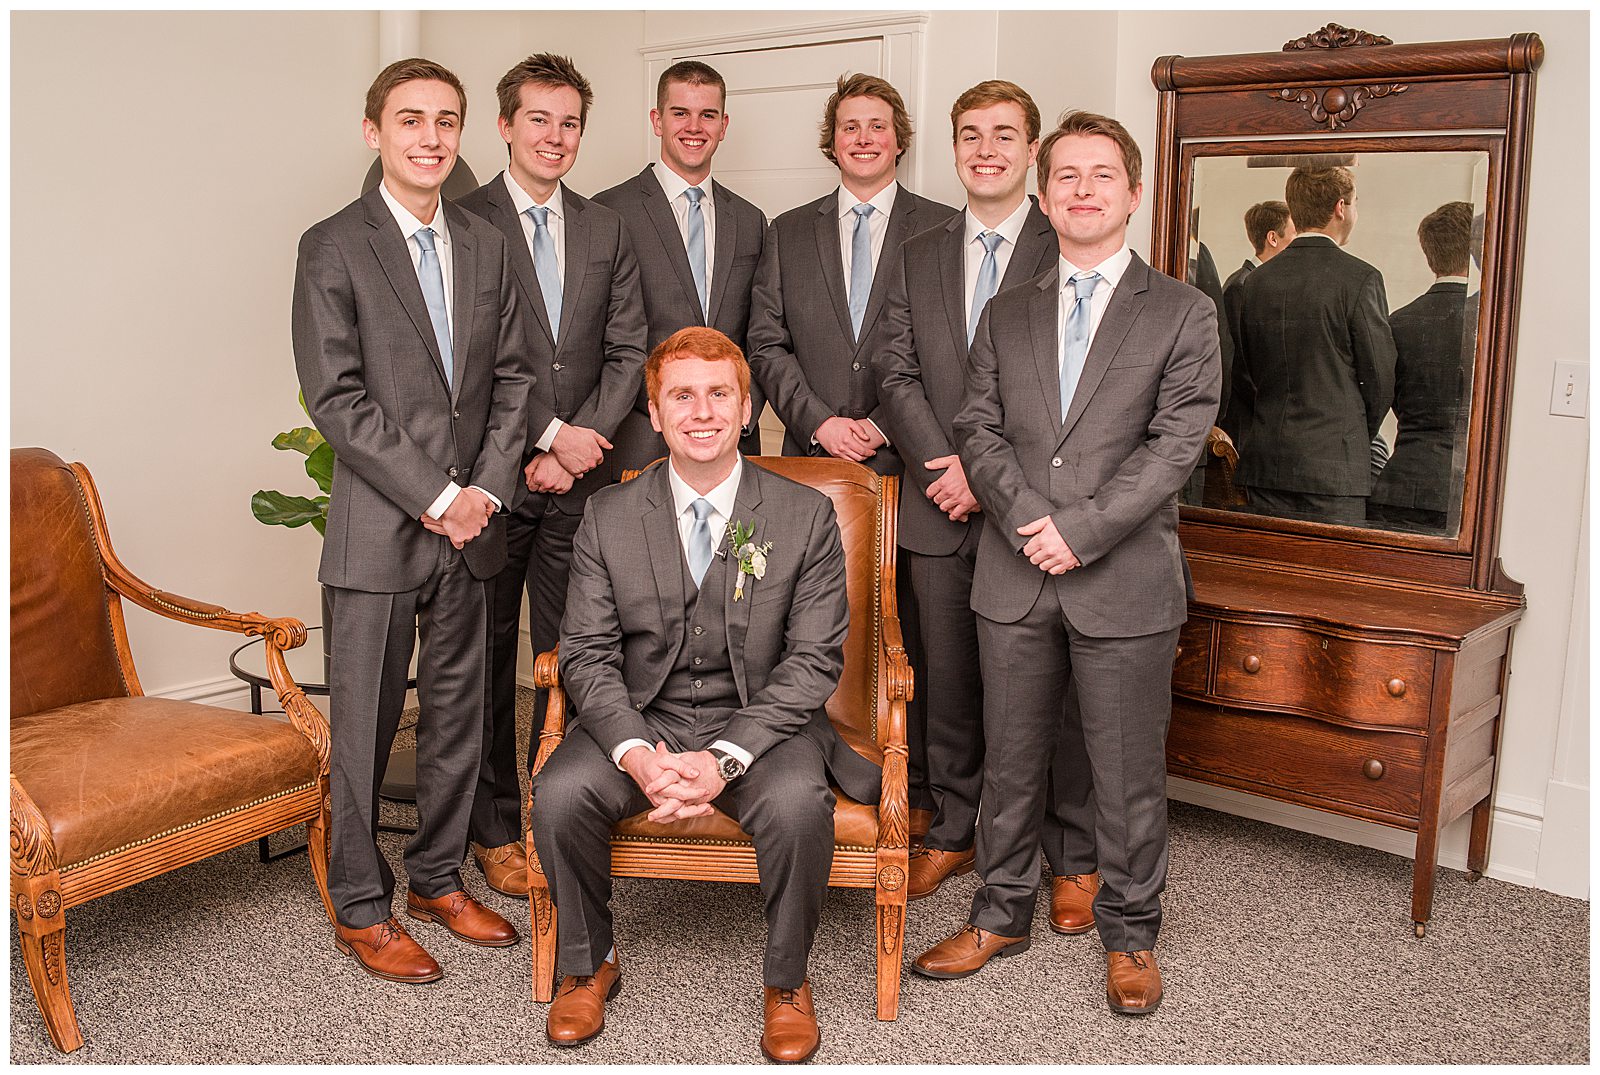 groom seated with groomsmen standing behind him, all smiling